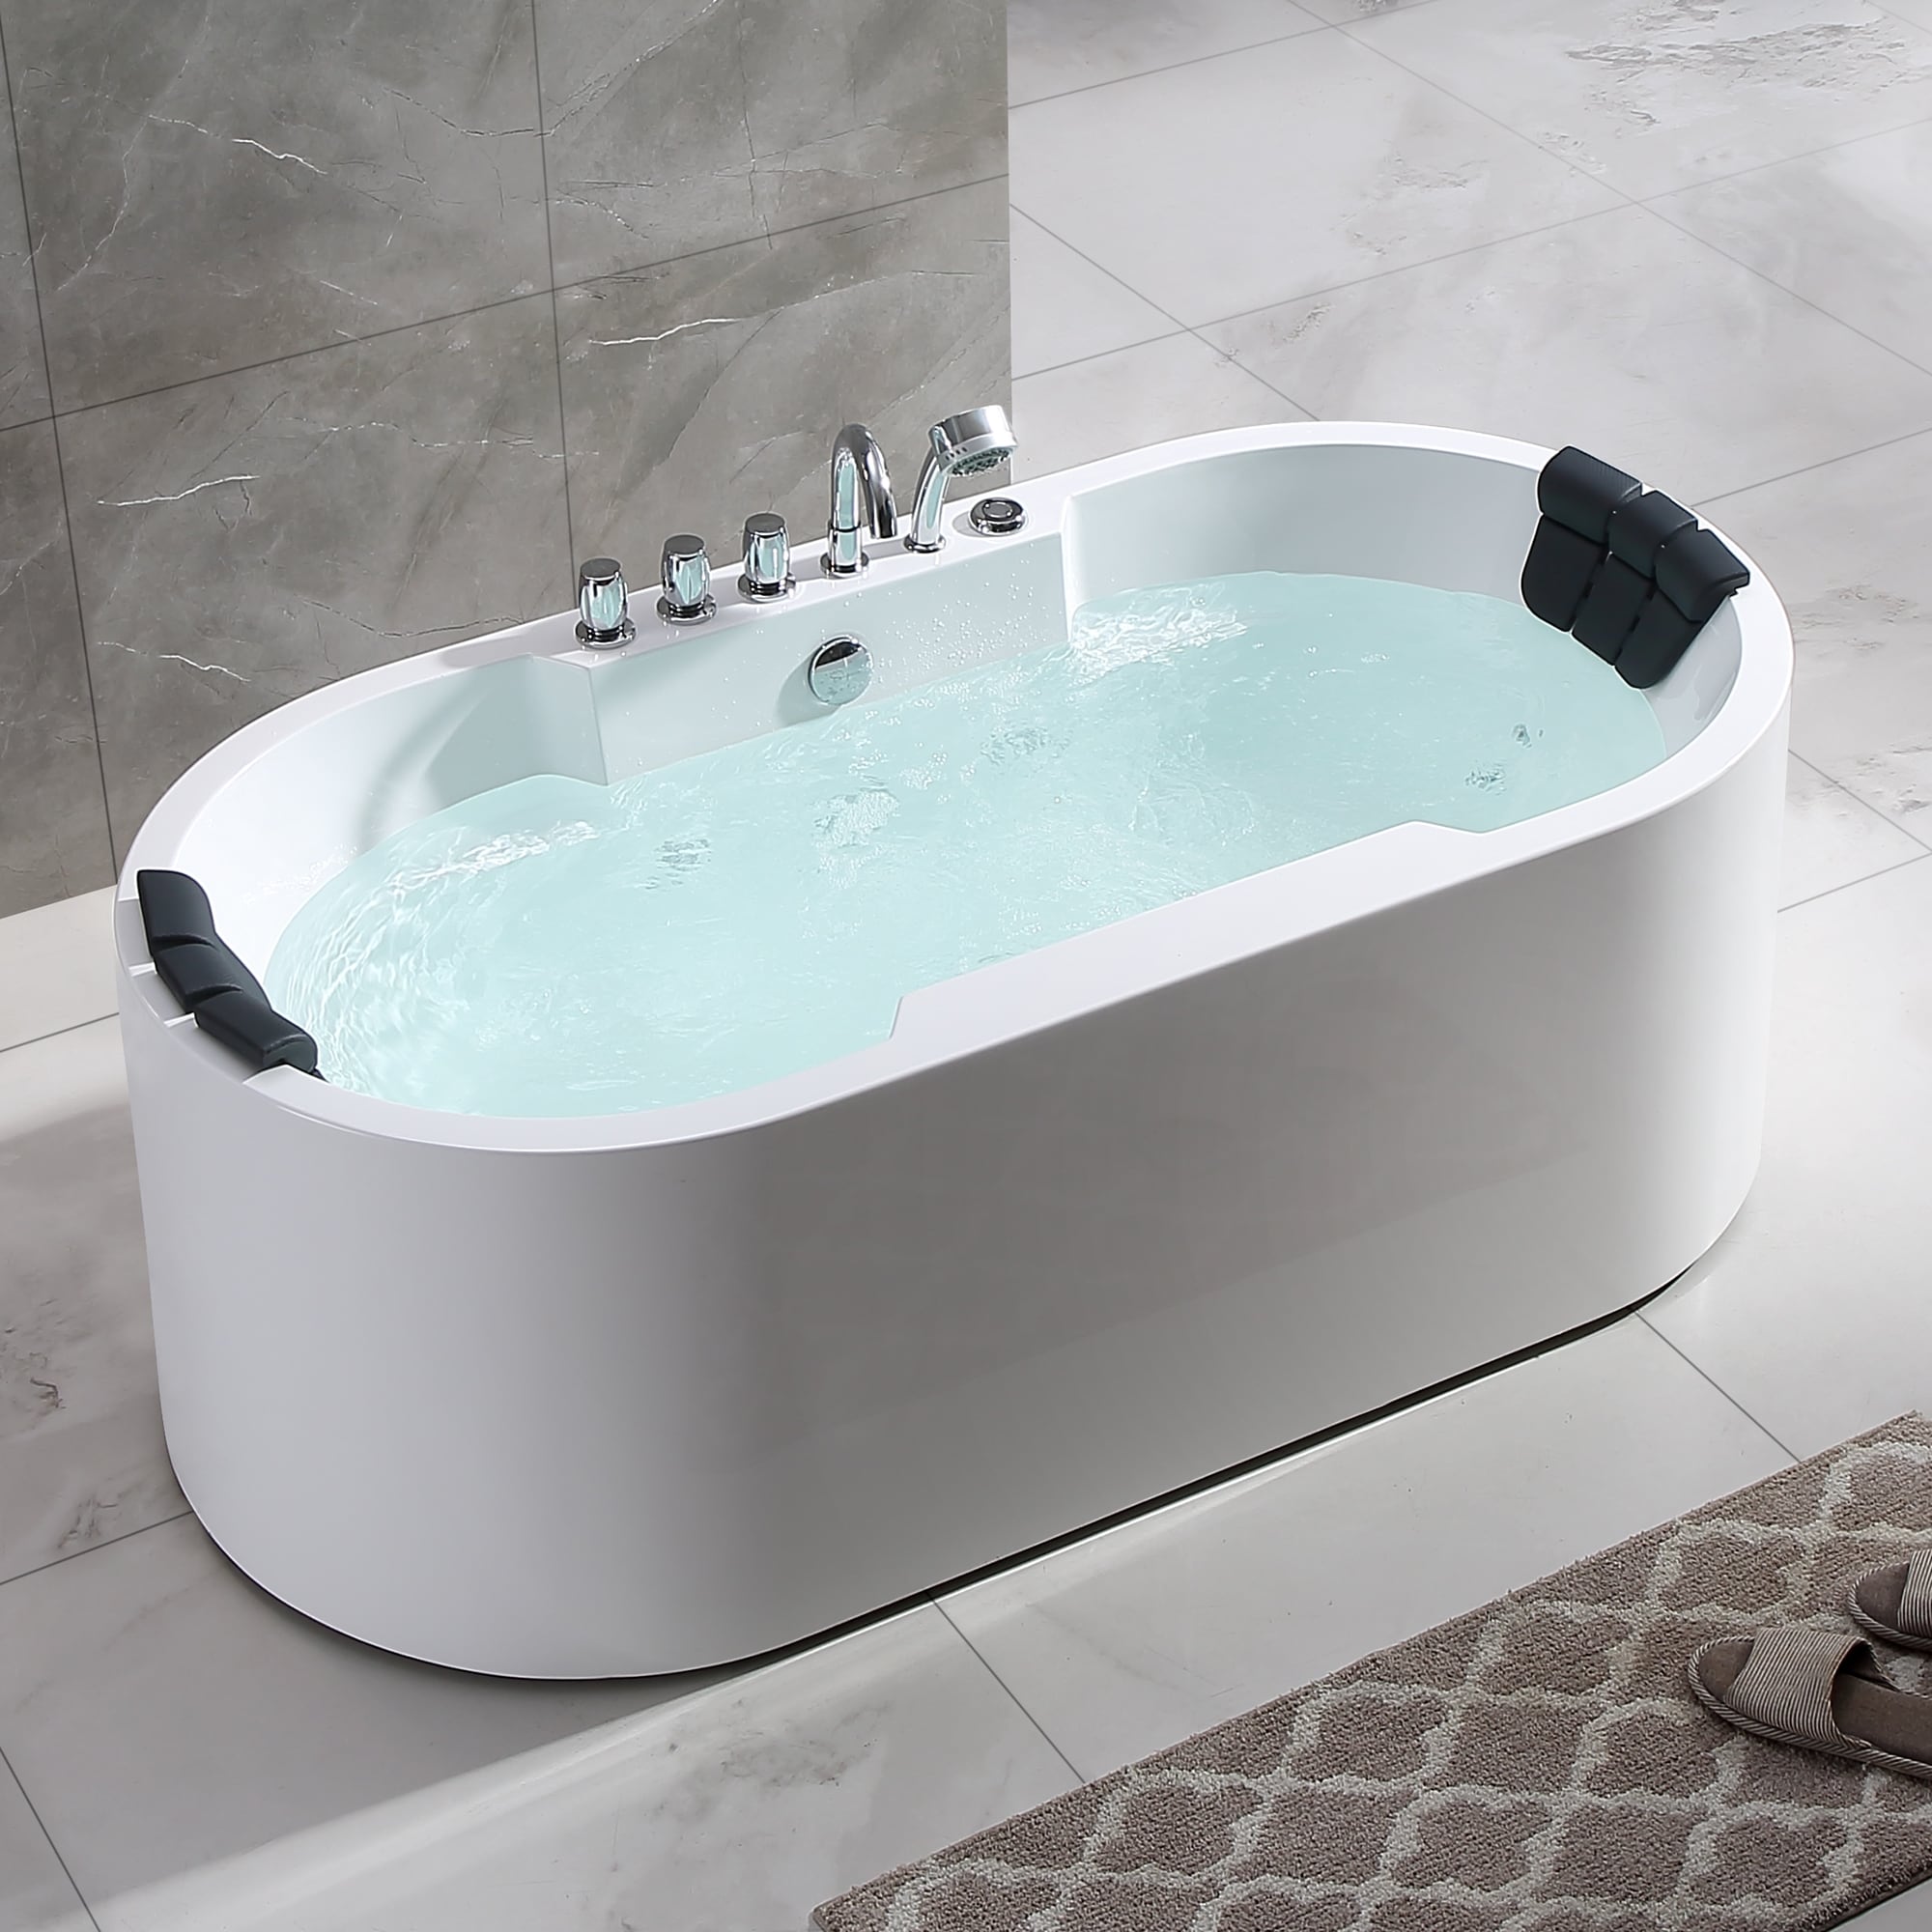 67 in Whirlpool Bathtub,Empava Jetted Tub with Heater,Hydro Massage Bathtub  with 9 Water Jets+8 Air Jets,SPA Bathtub with Waterfall,Whirlpool Tub with